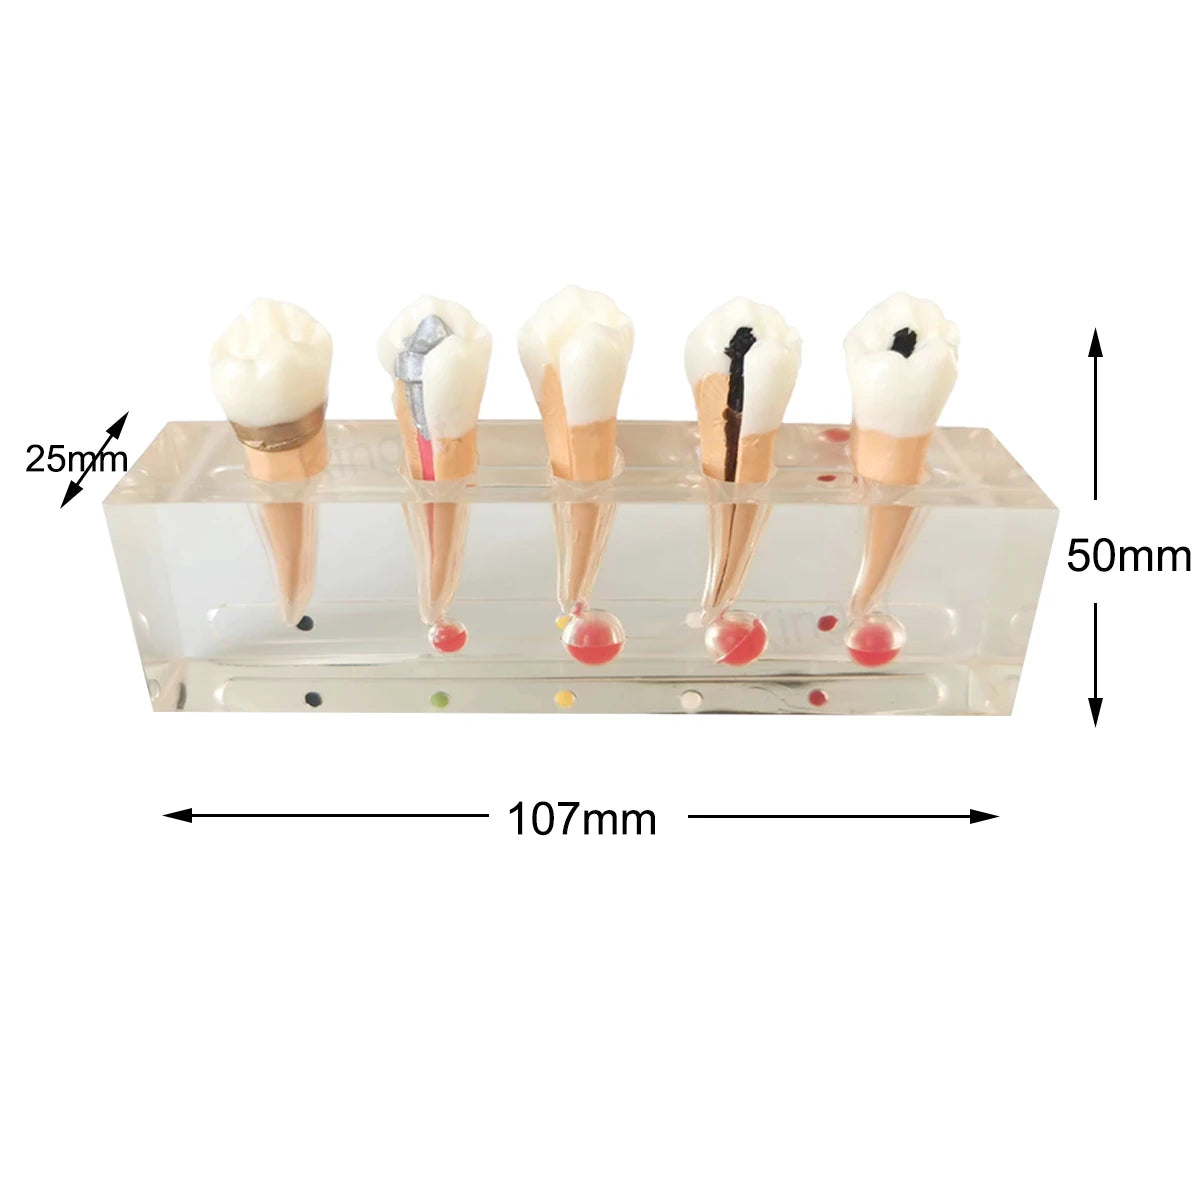 Dental Teaching Model Endodontic Treatment Model Demos 5 Stages of Root Canal Procedure on 2nd Premolar for Dental Laboratory